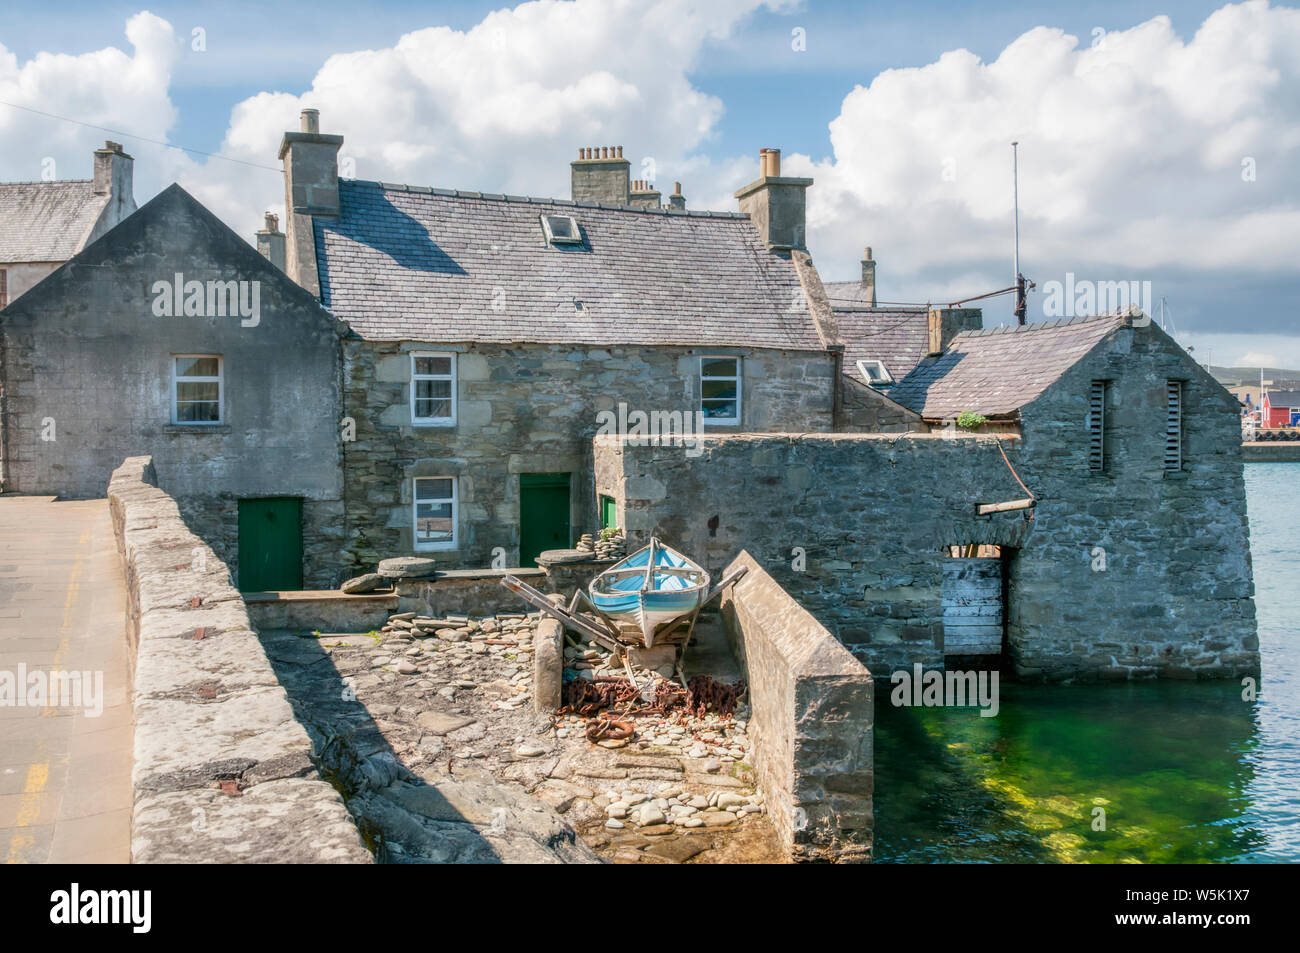 The picturesque lodberry in Lerwick which is the fictional home of the detective Jimmy Perez in the TV series Shetland. Stock Photo